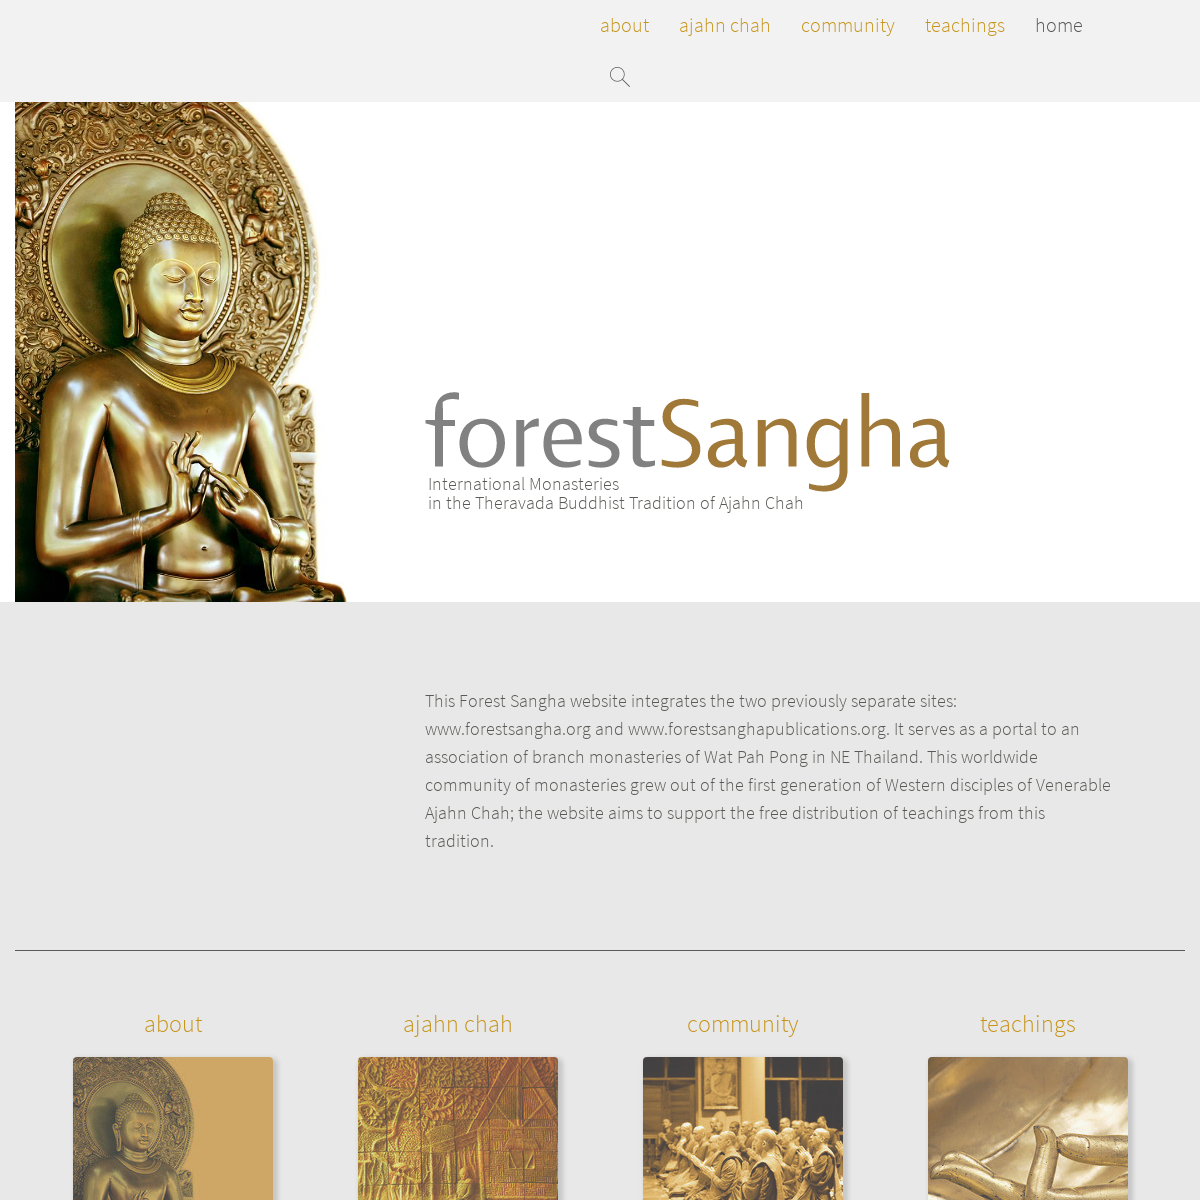 A complete backup of forestsangha.org